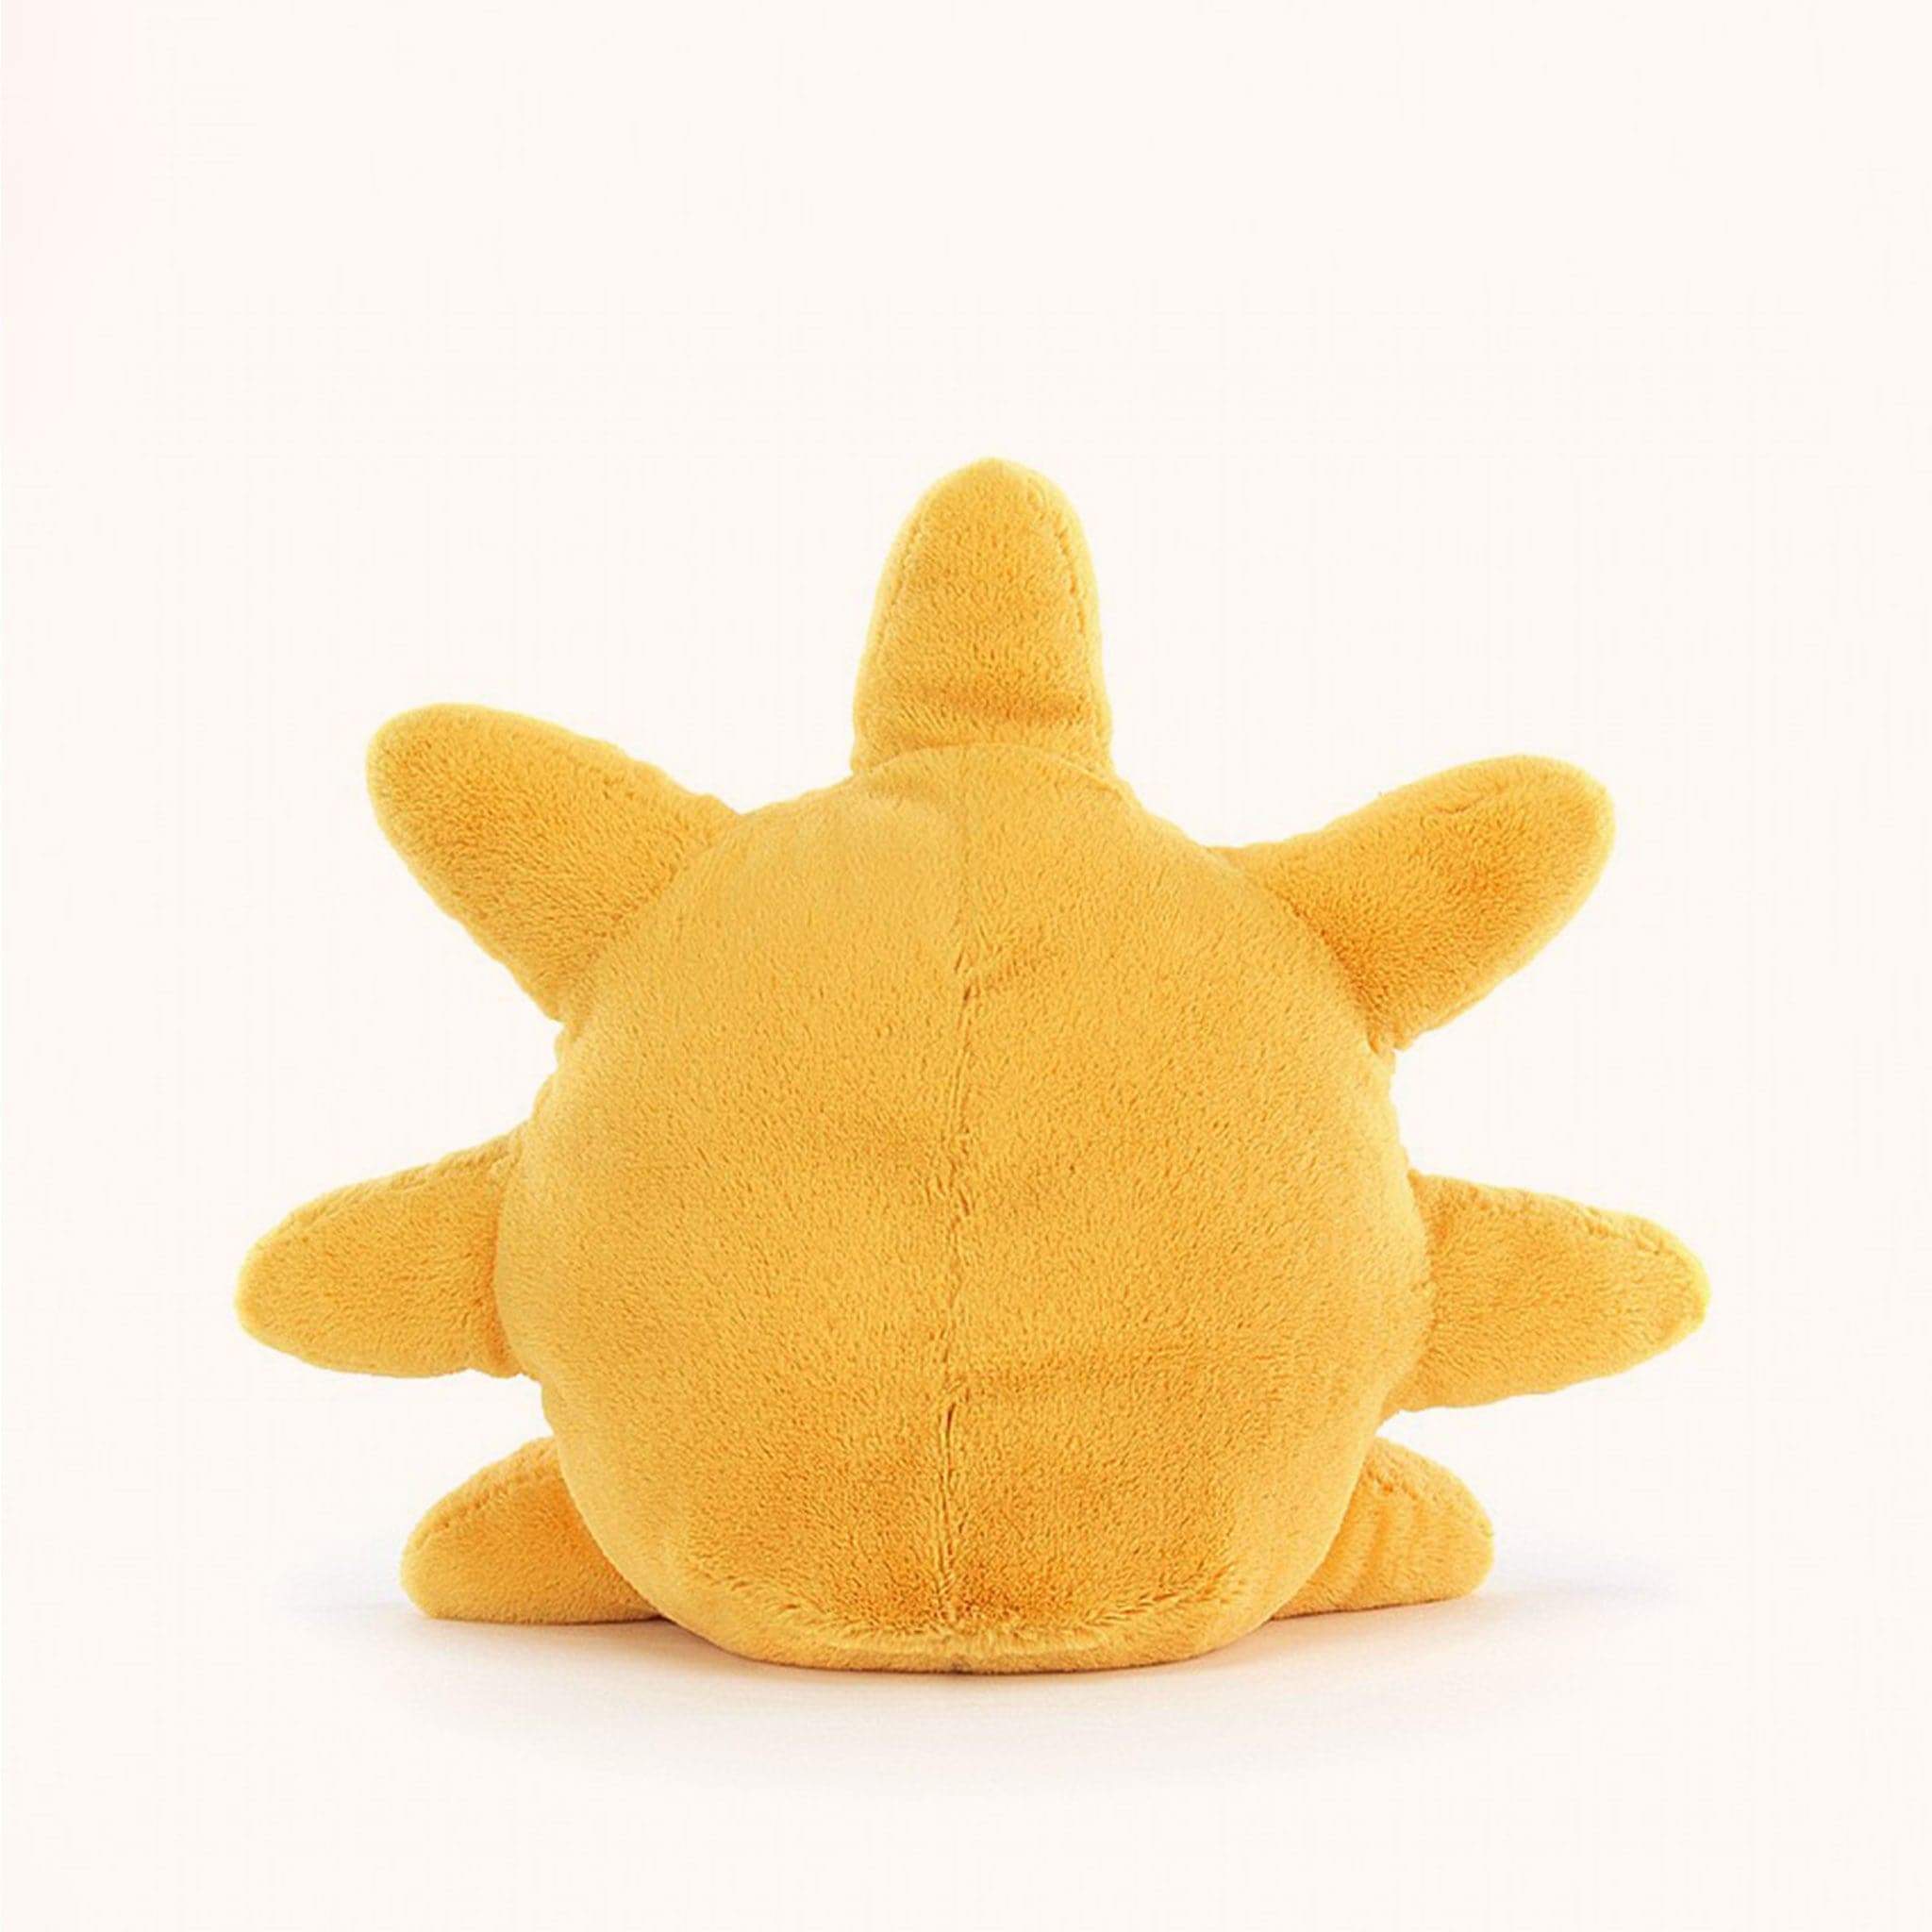 Soft stuffed animal in the shape of a yellow sun, with a smiley face and floppy brown legs.